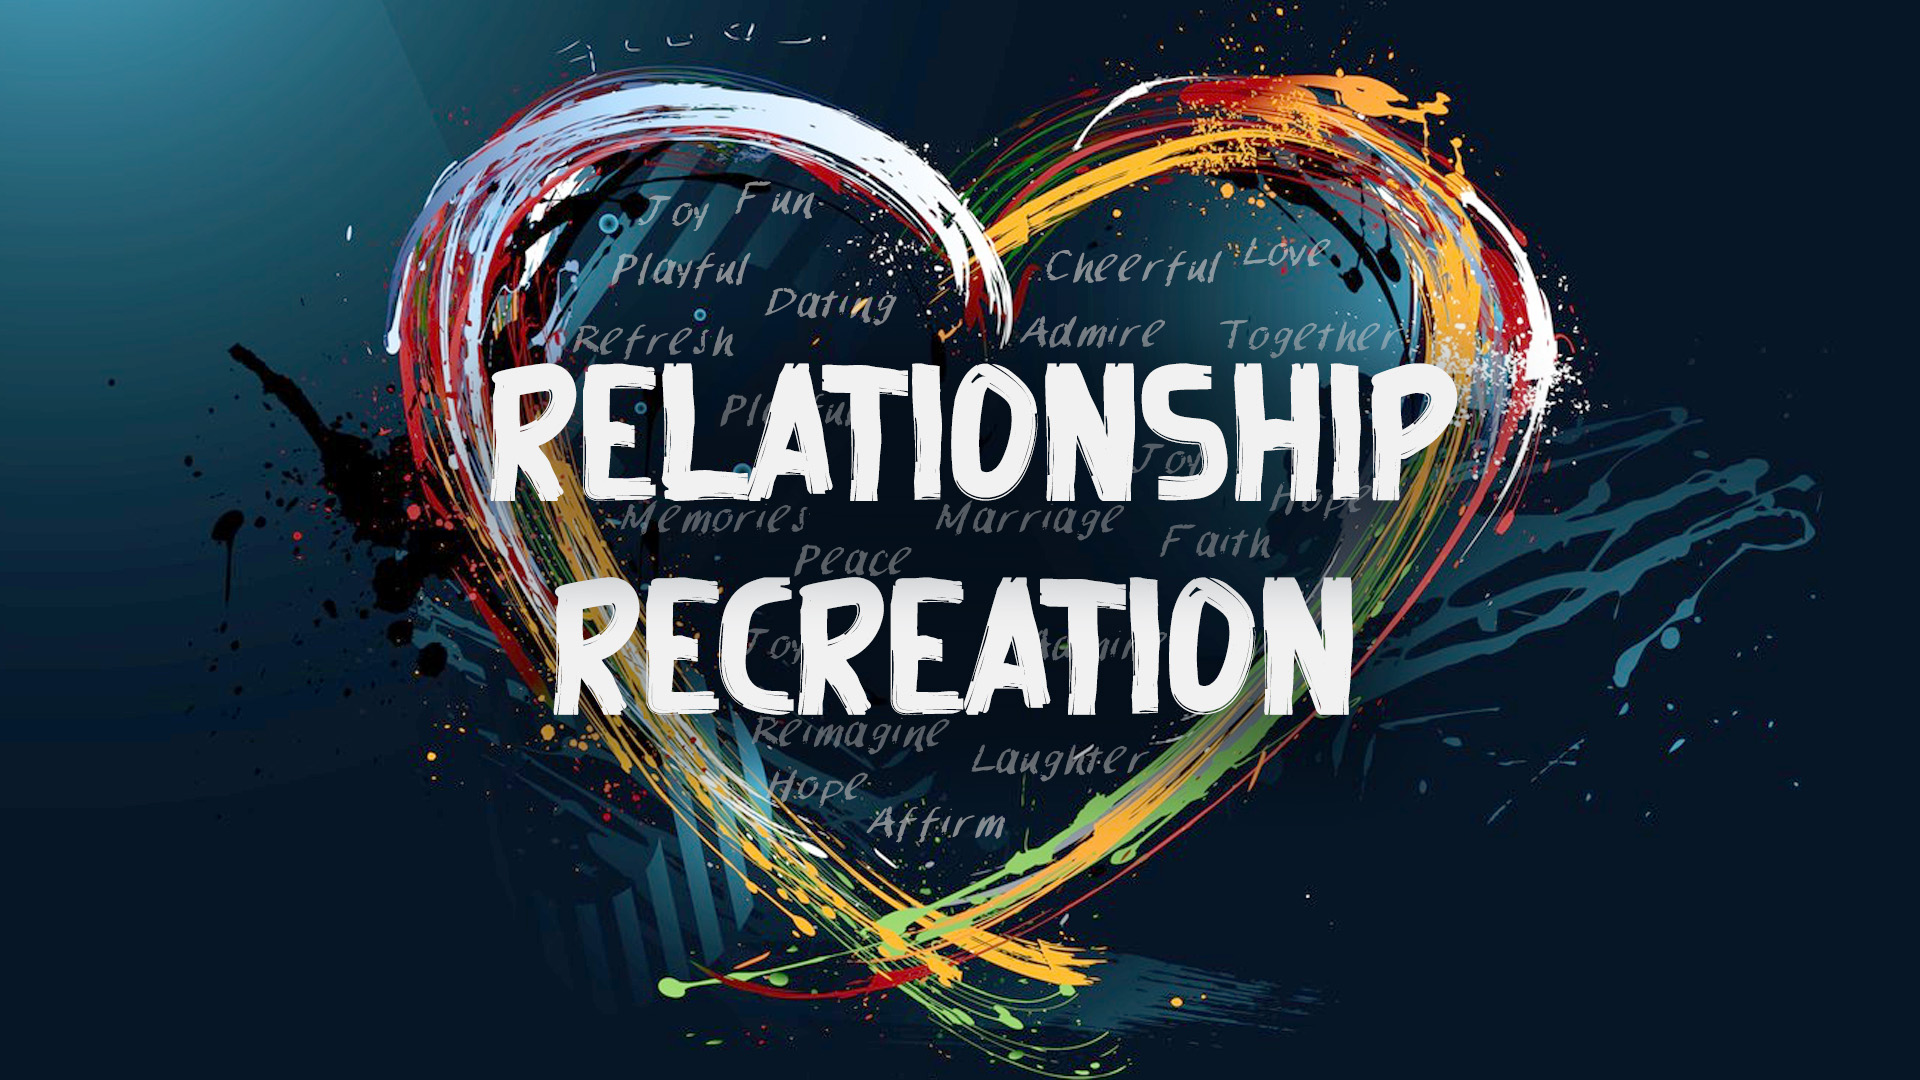 Relationship Re-Creation (For Couples)

Quarterly Meetings
Saturday | 5:00pm
September 21
Childcare Provided
